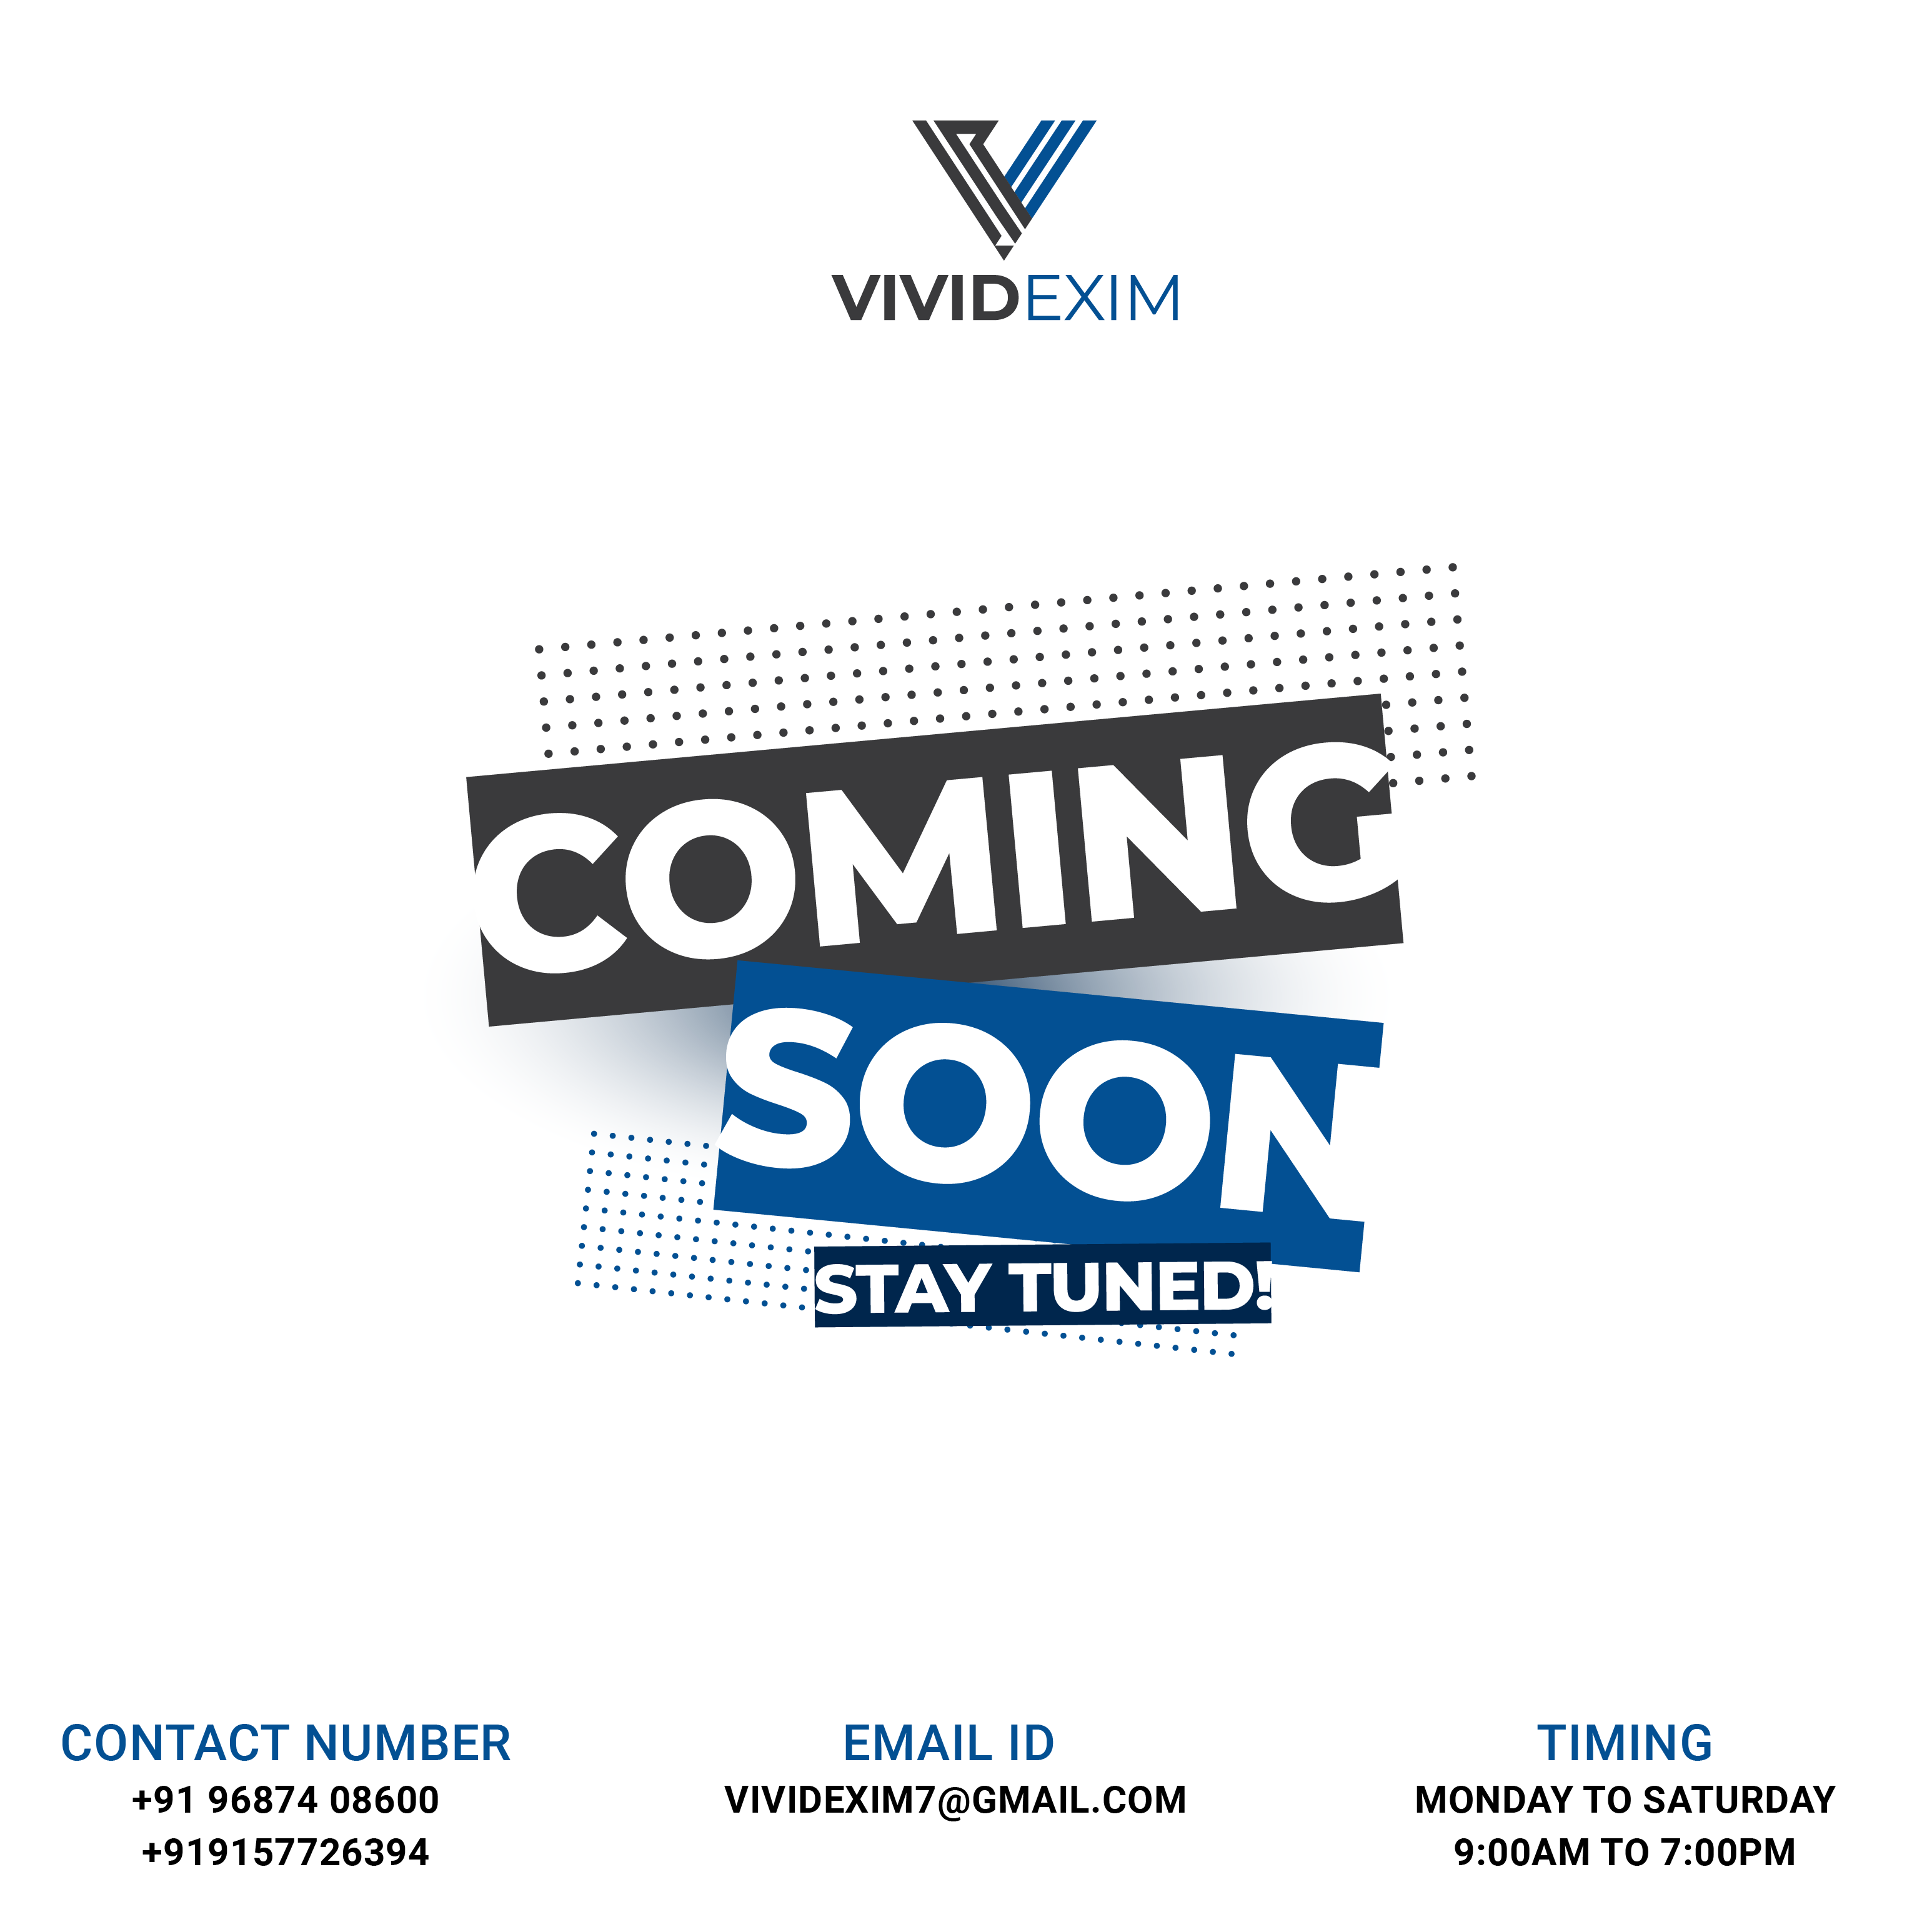 Website coming soon Images | Free Vectors, Stock Photos & PSD